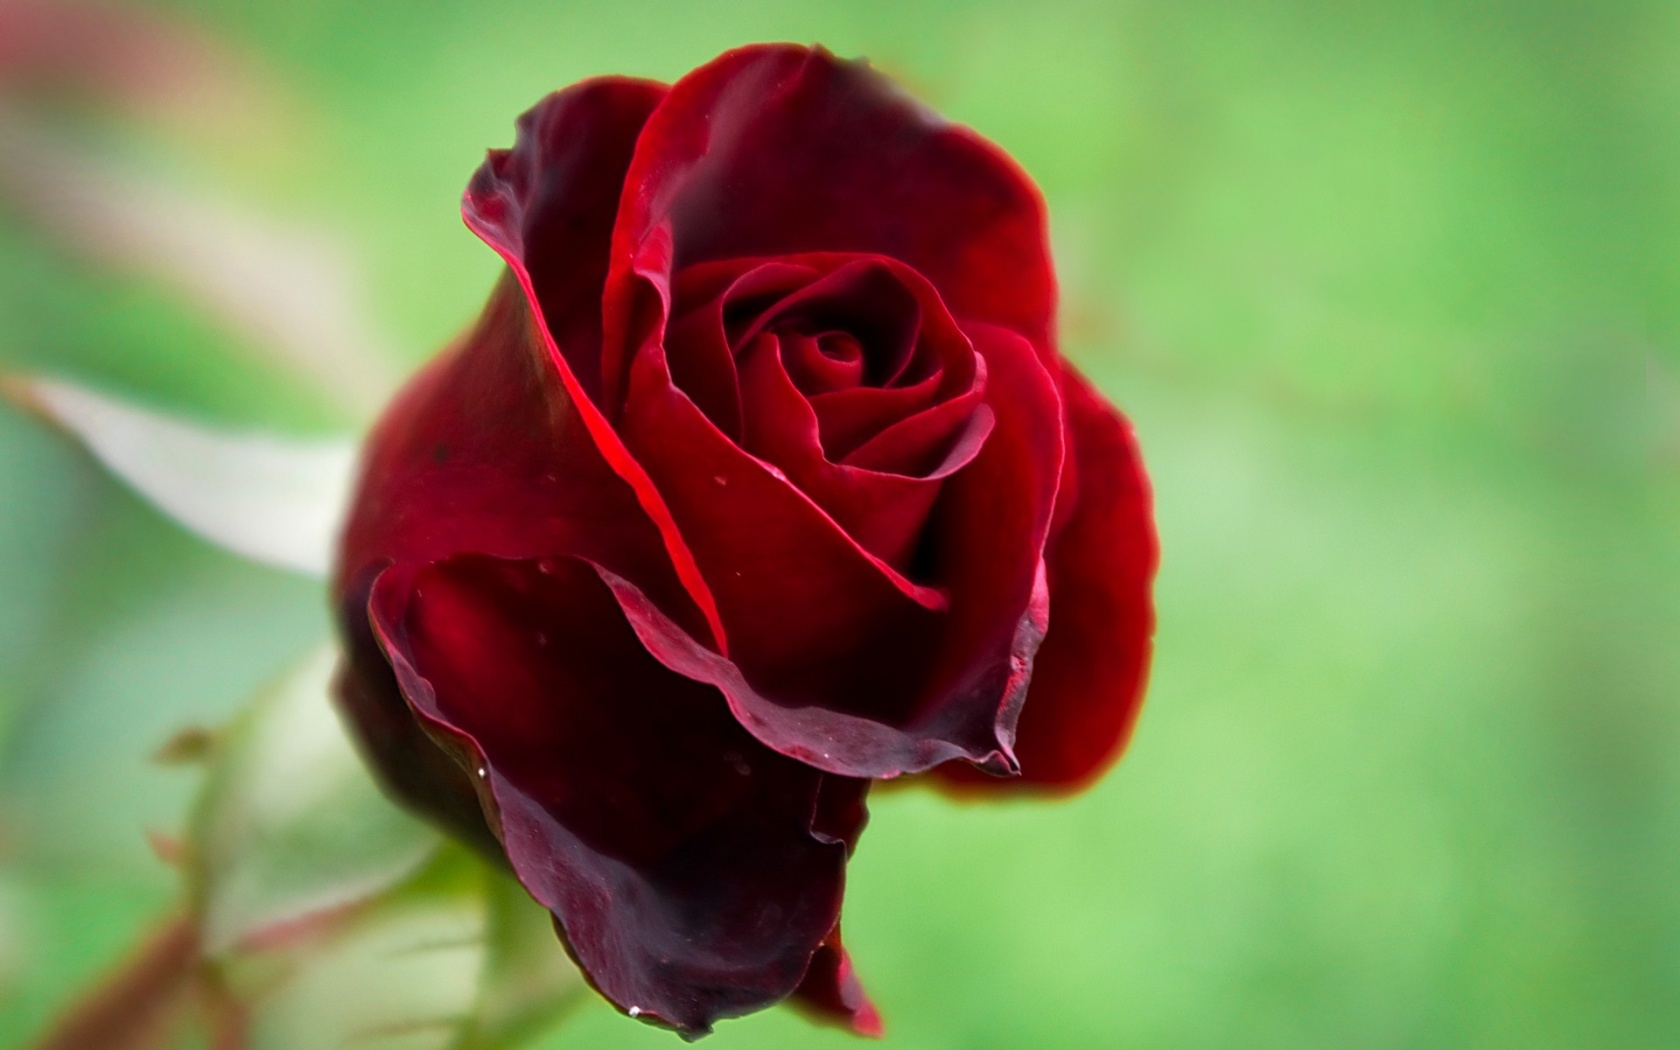 plants, roses, flowers, red High Definition image